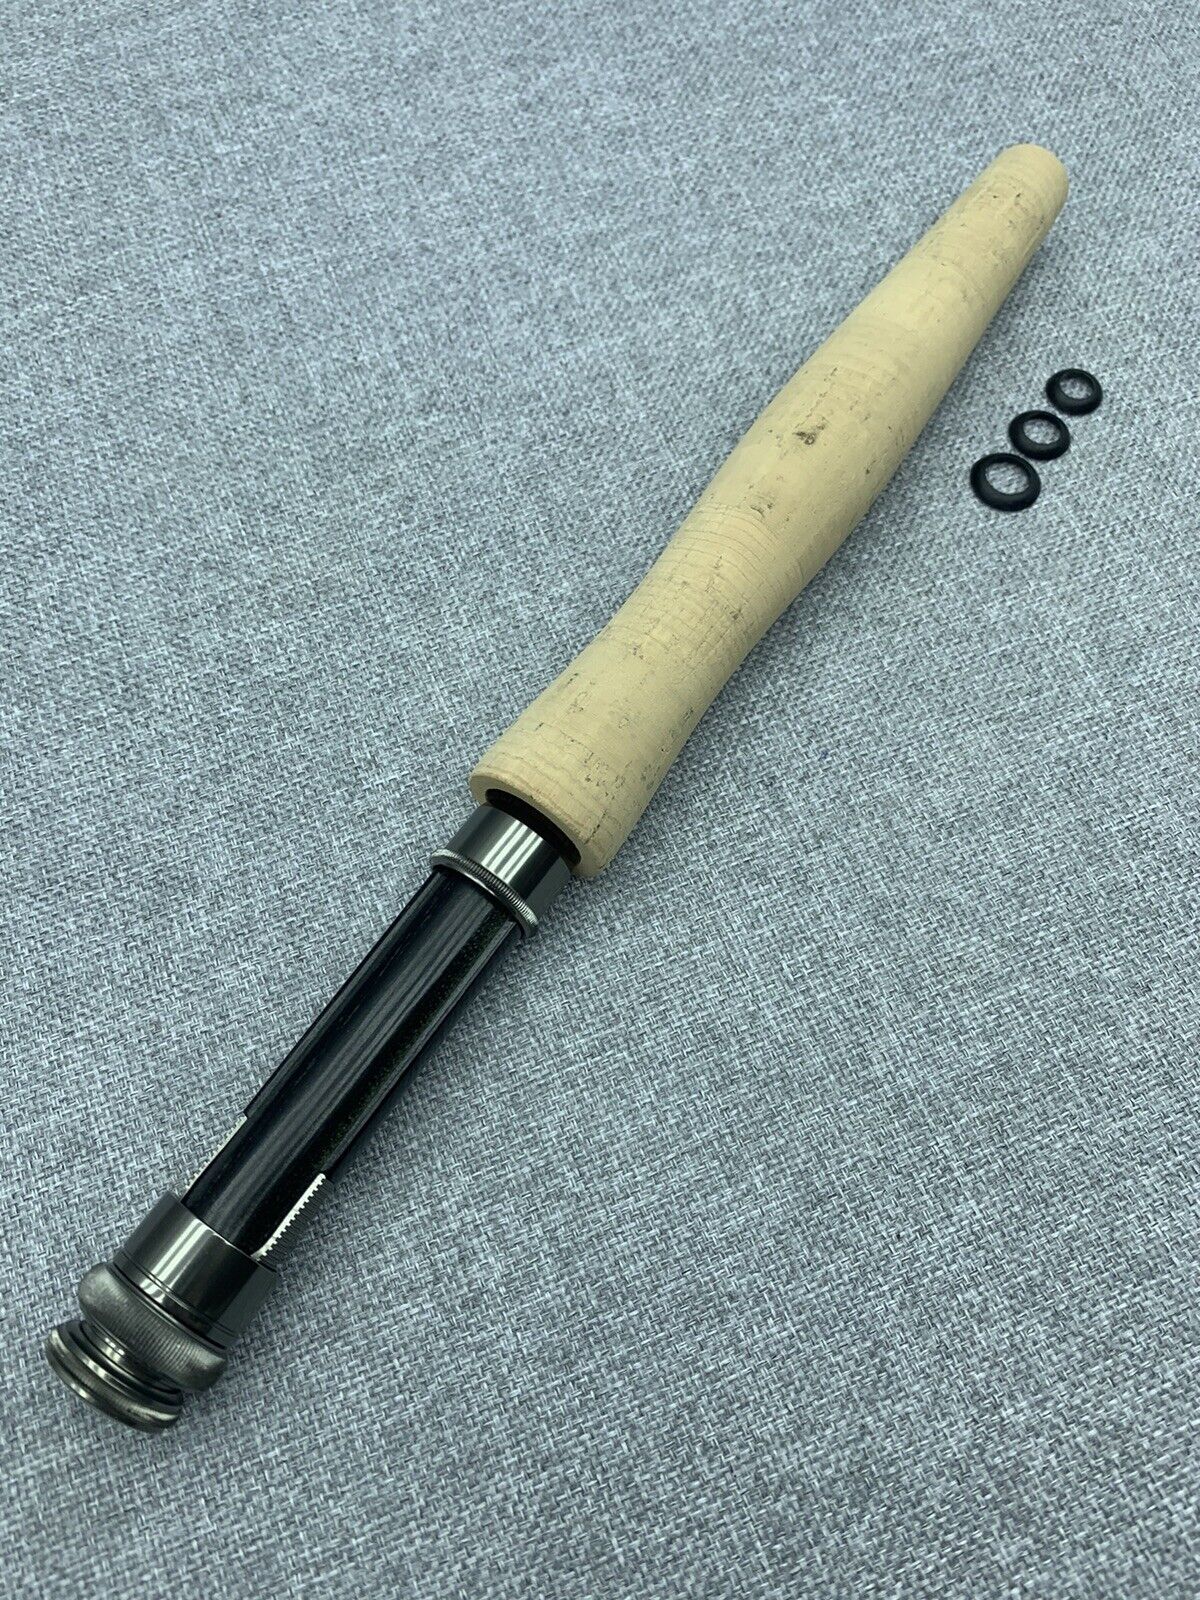 Forecast fly rod building Max 76% OFF handle 2-6wt ebony with kit gunsmoke All items free shipping